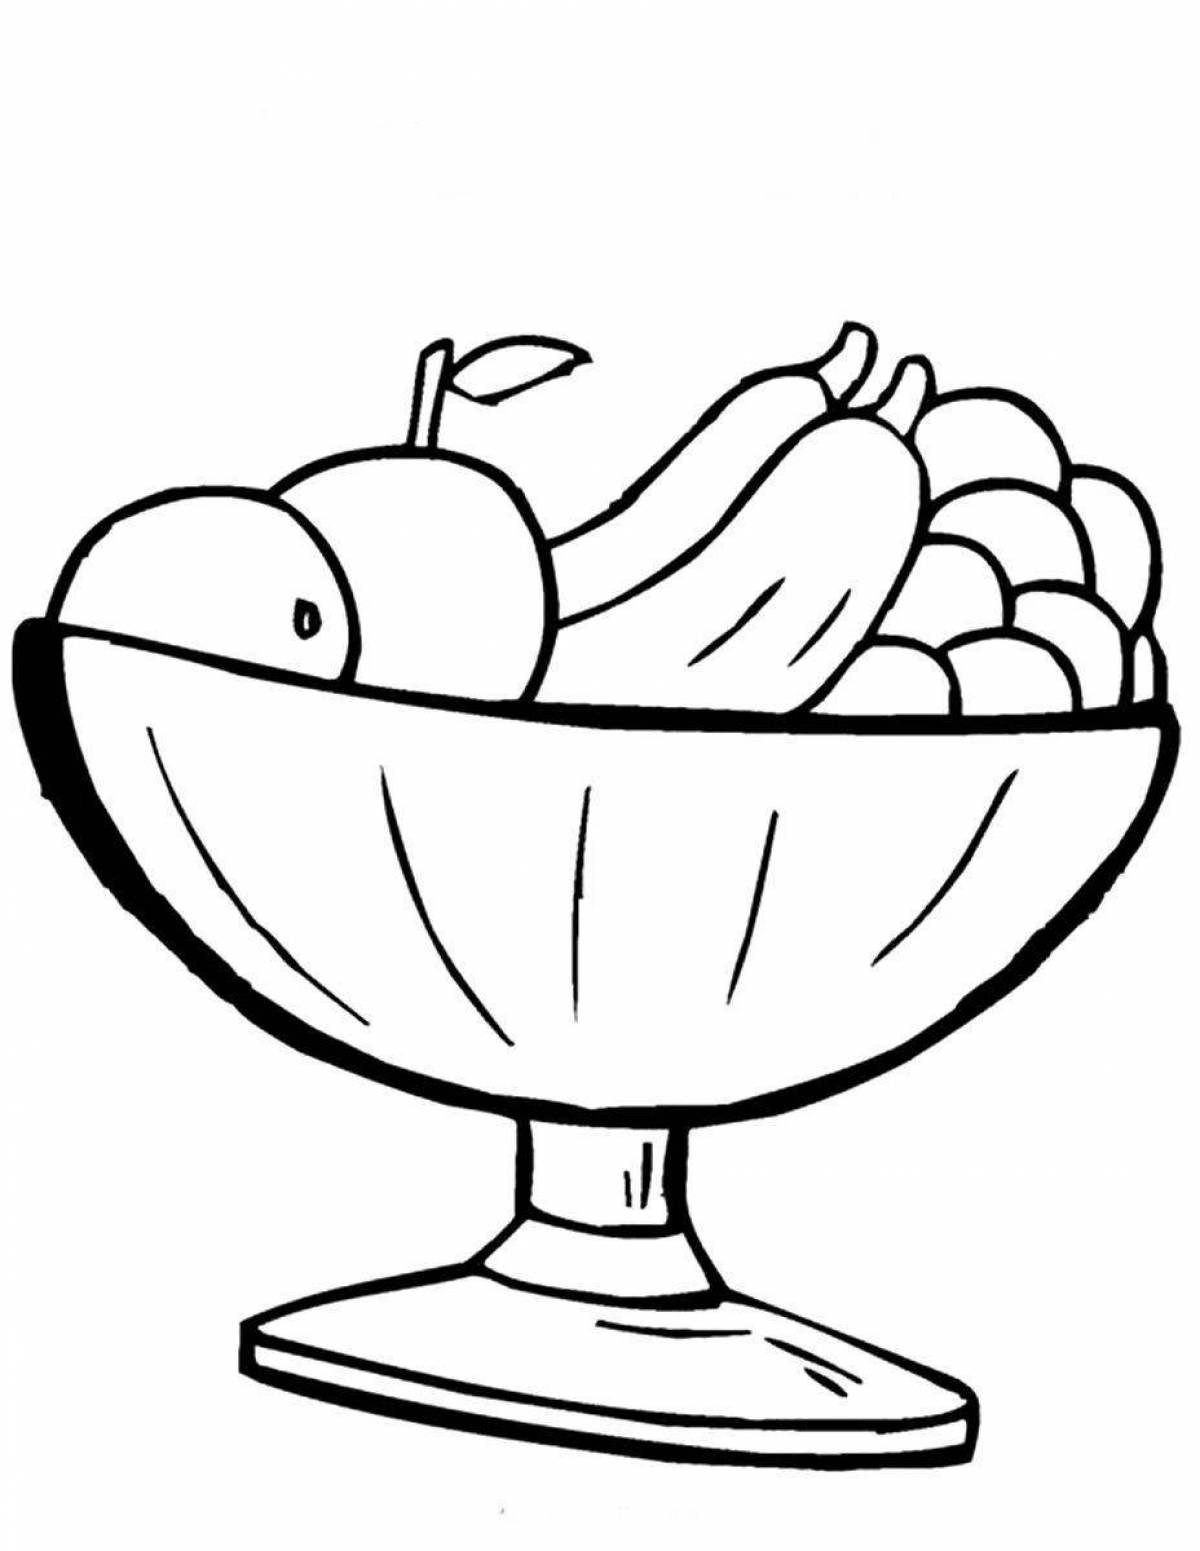 Bright fruit plate coloring book for kids